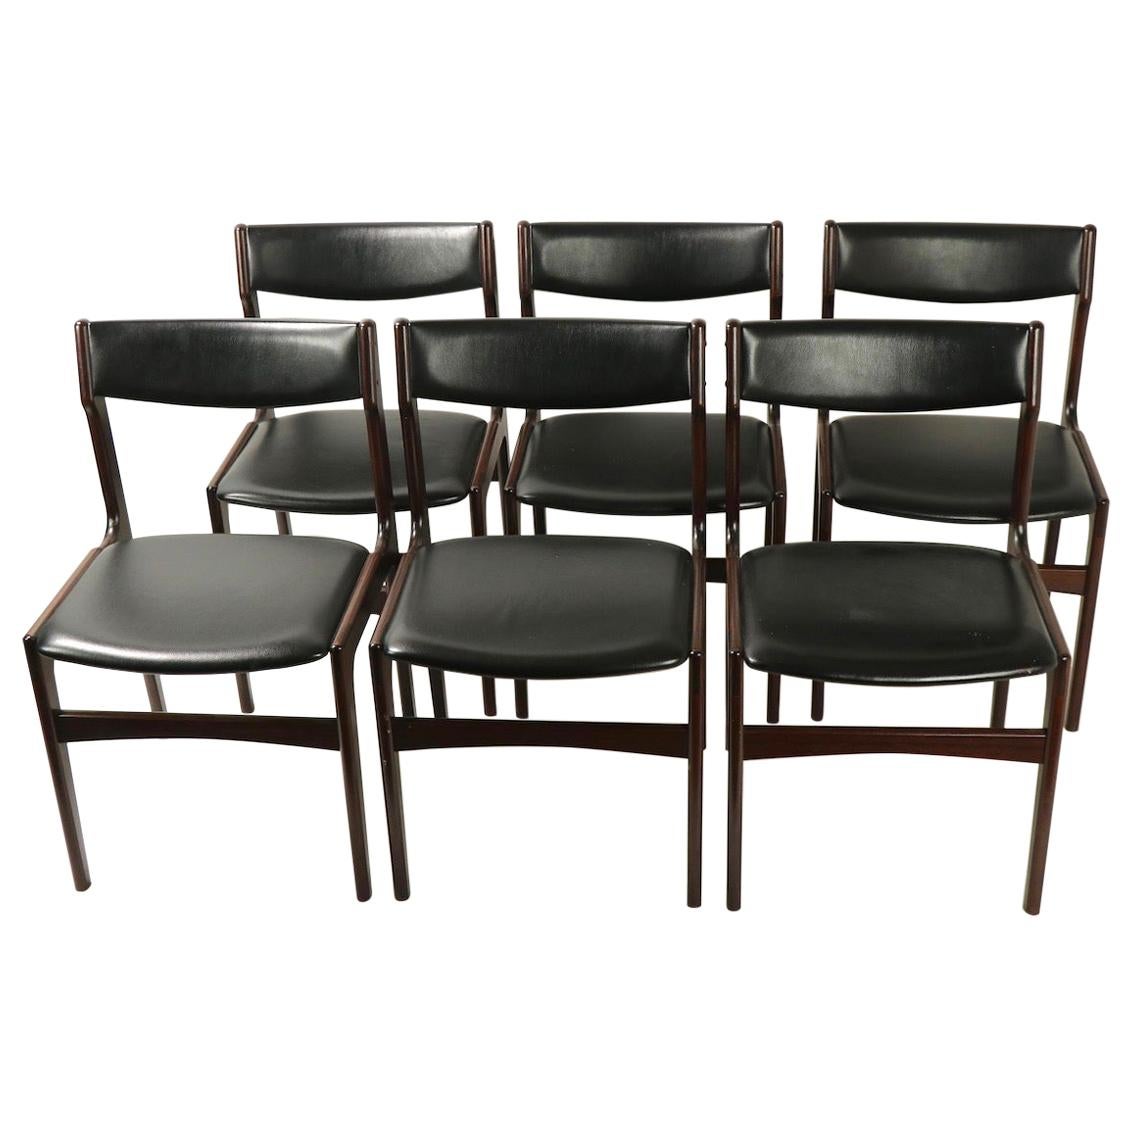 Set of 6 Rosewood Danish Modern Dining Chairs by Anderstrup Mobelfabrik